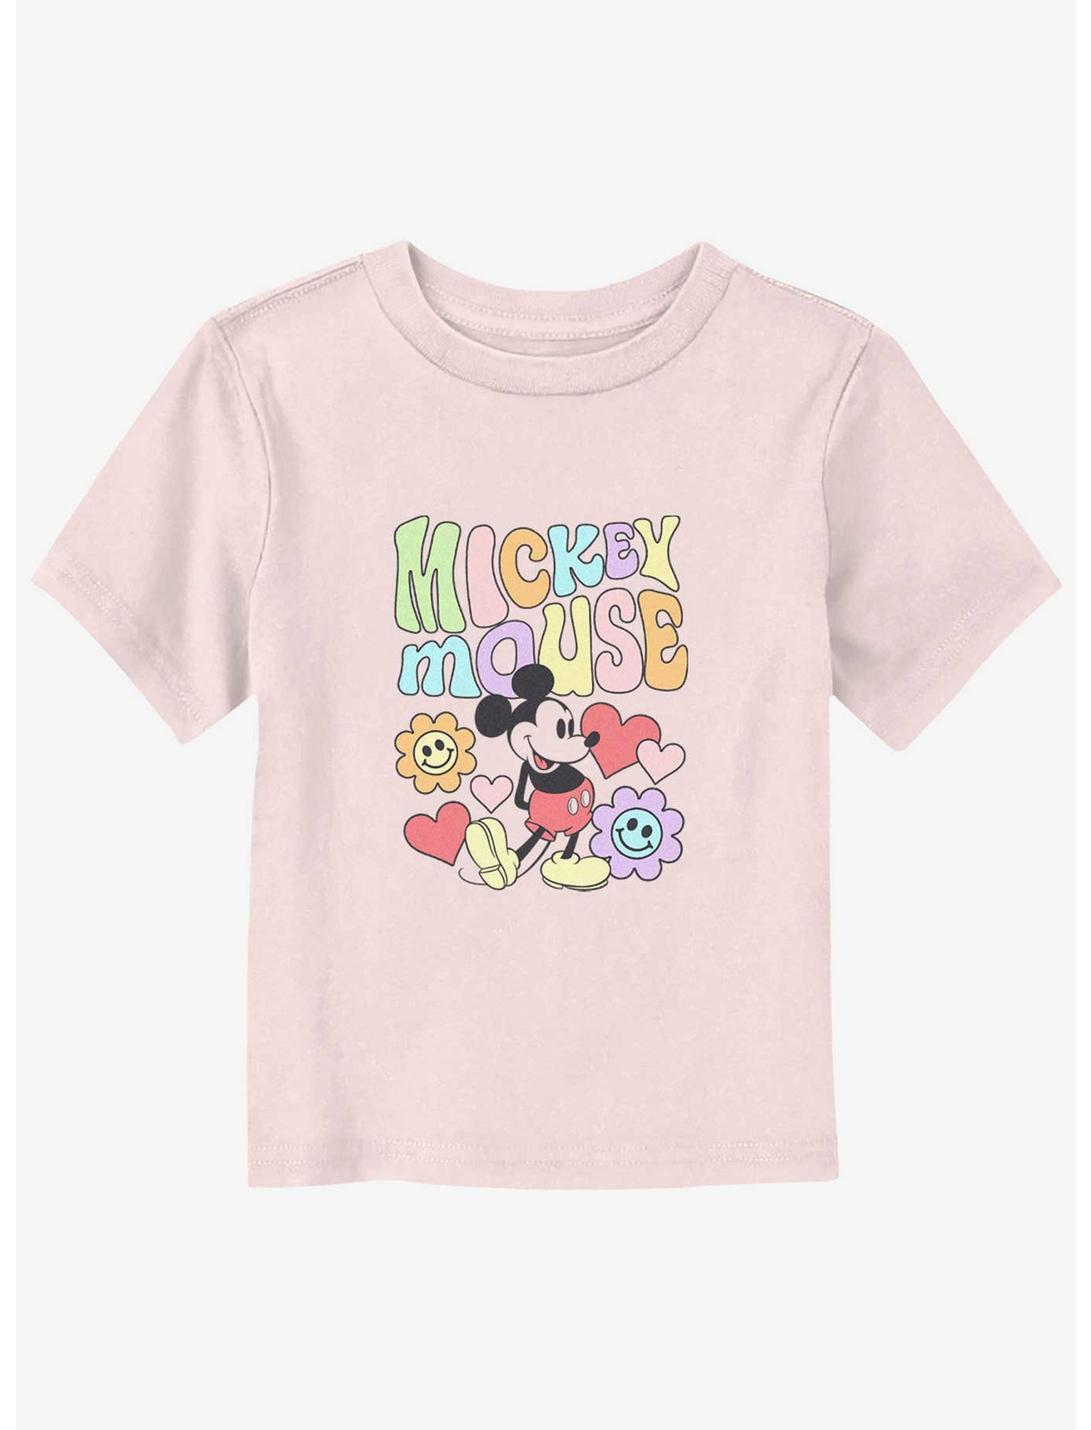 Disney Mickey Mouse Groovy Toddler T-Shirt, LIGHT PINK, hi-res